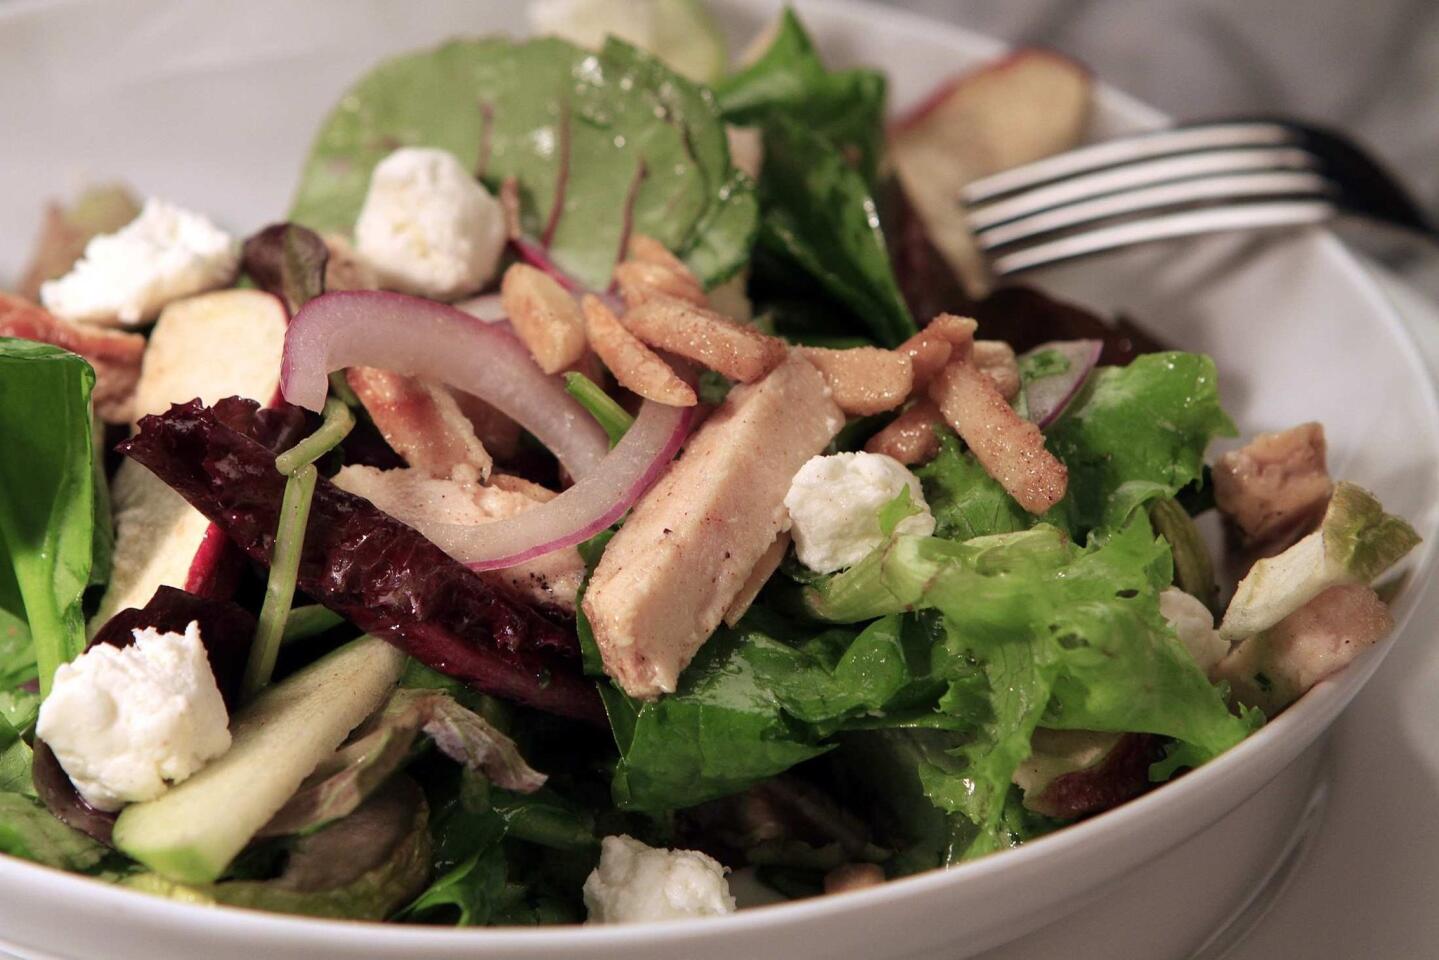 Nordstrom chicken, apple and goat cheese salad